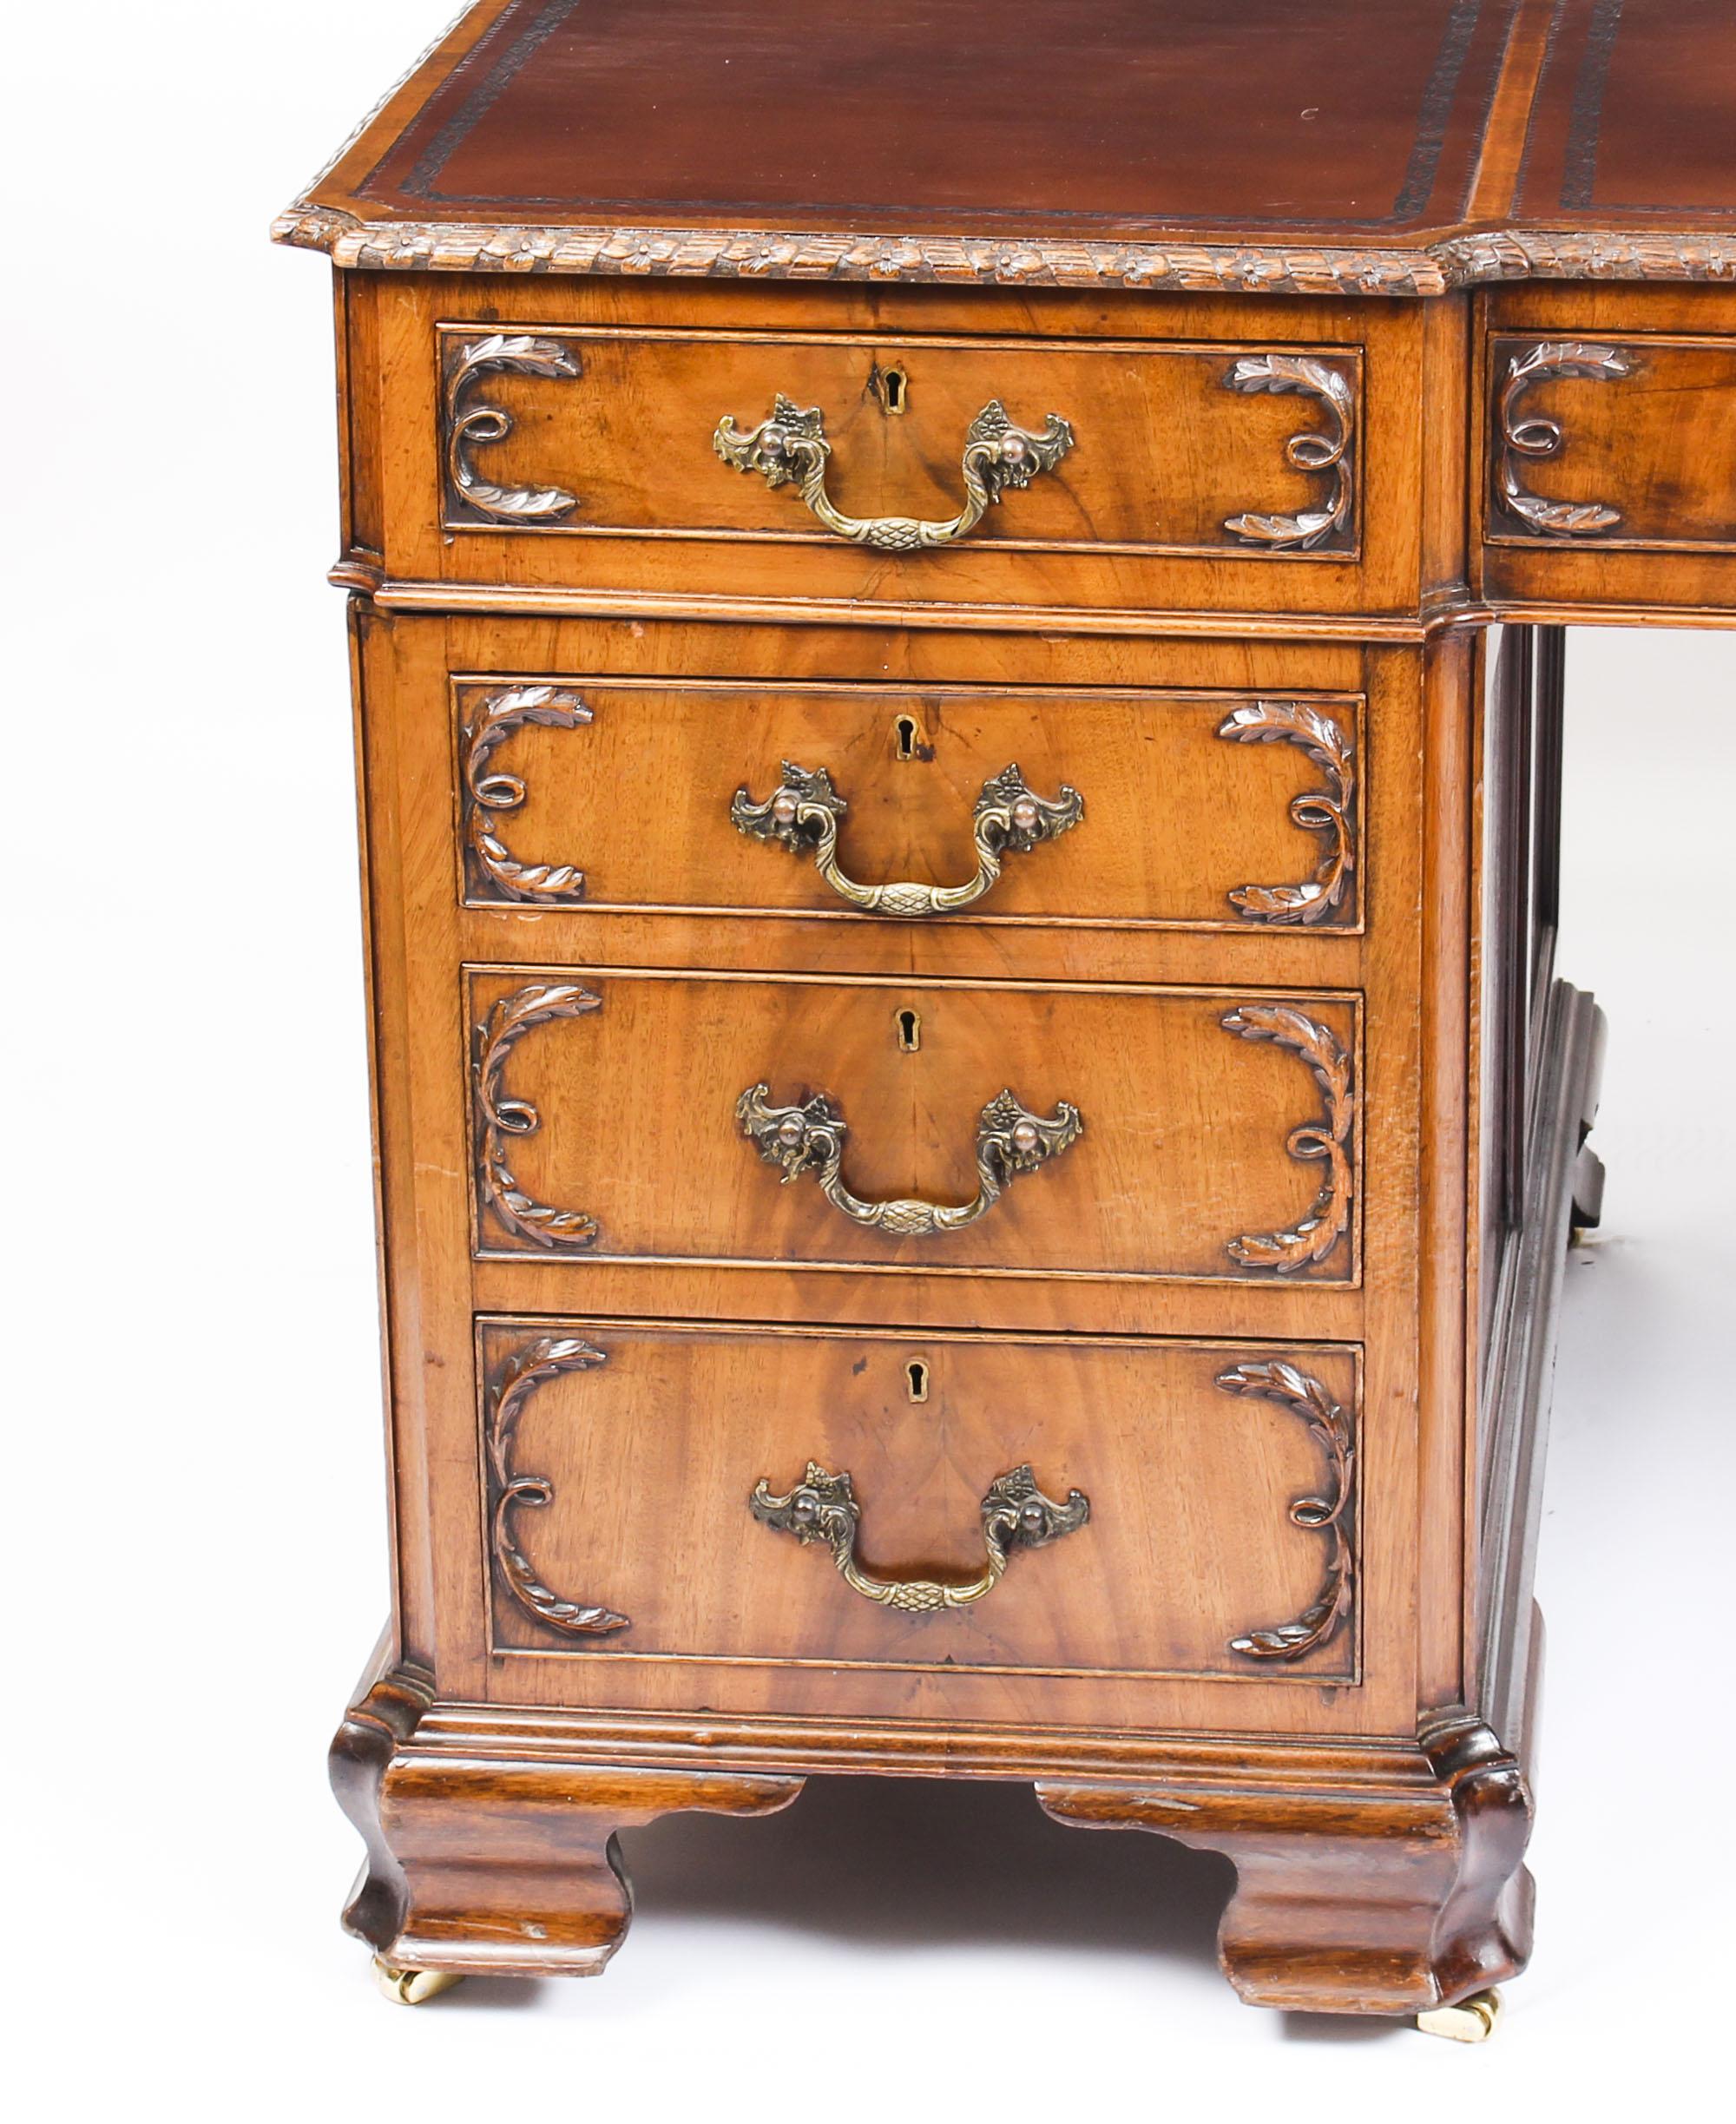 Late 19th Century Antique Flame Mahogany Partners Pedestal Desk George III Revival 19th Century